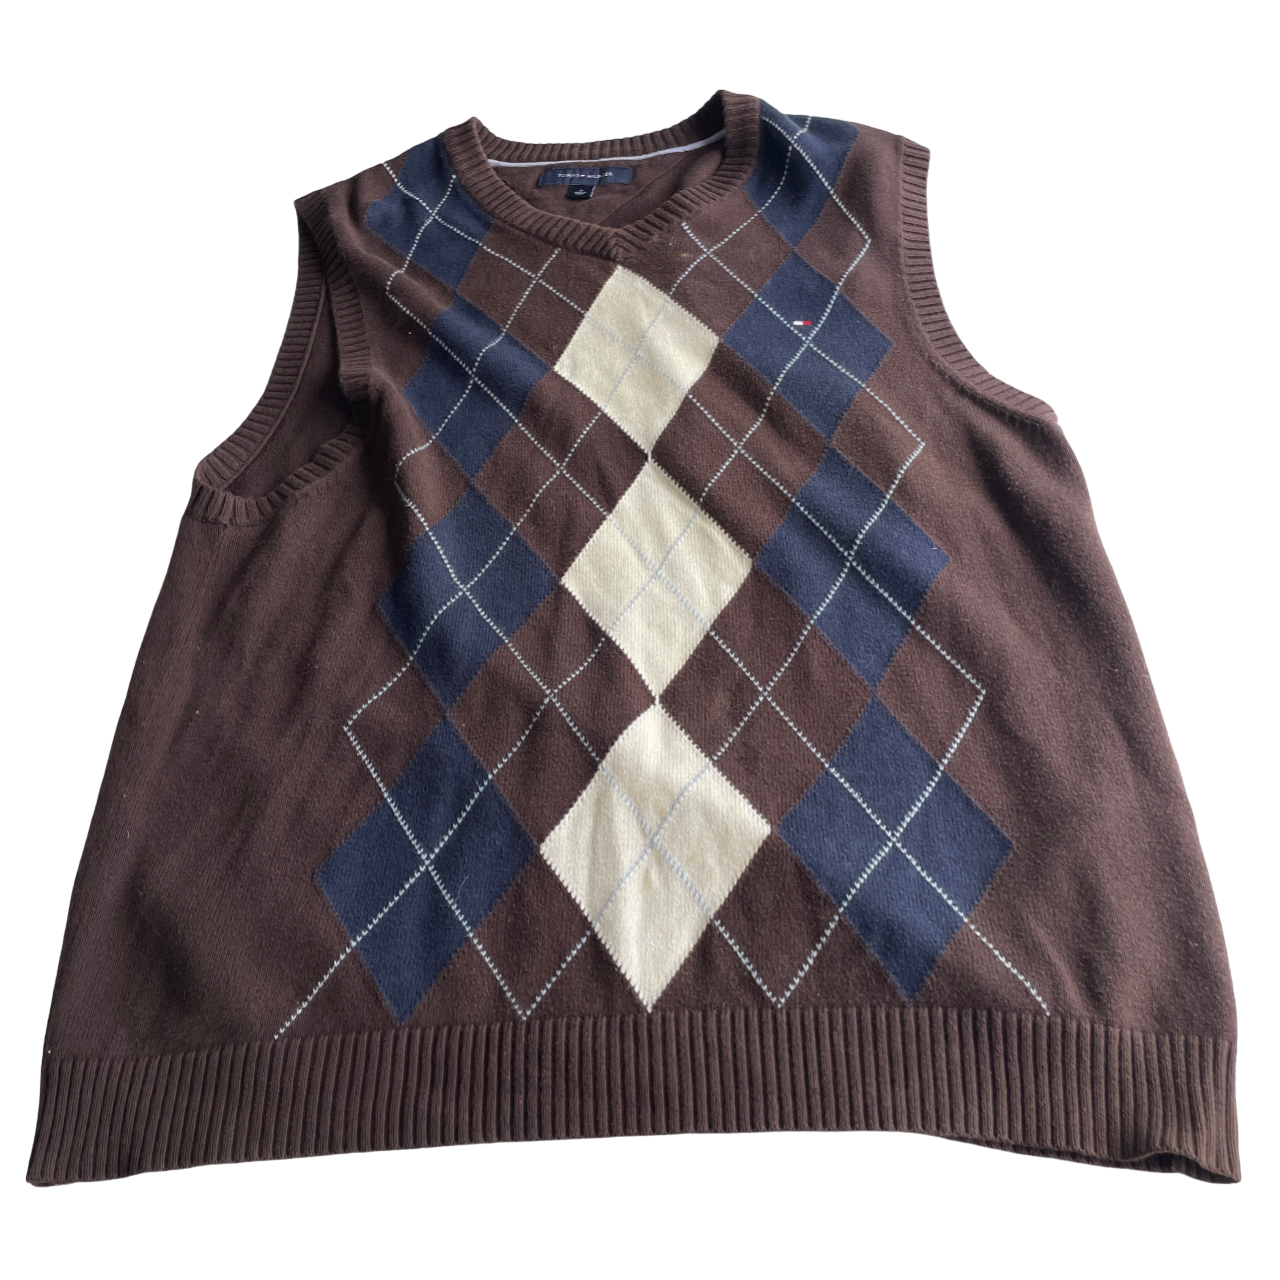 Tommy Hilfiger Men Checkered Sweater Knit Vest Tank Sleeveless Jumpers V Neck Wool Vintage Casual For Autumn Winter Male In brown size M l 29 W 21 SKU 5221